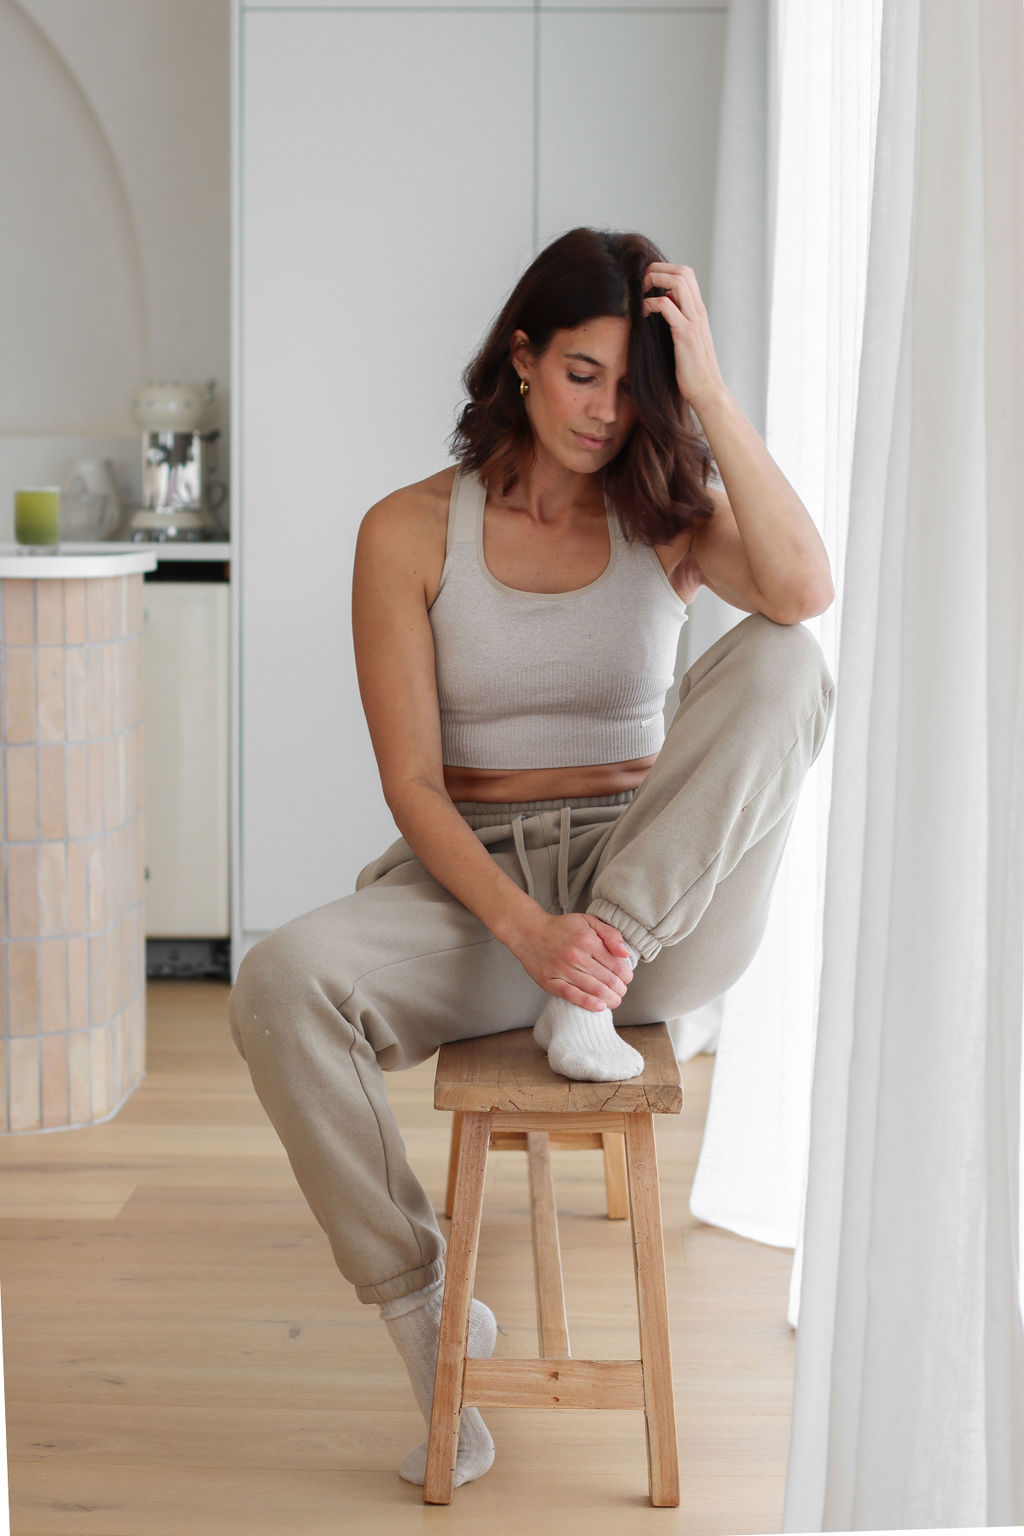 Brooklyn woman sitting on a stool in her apartment. Depression treatment can help.